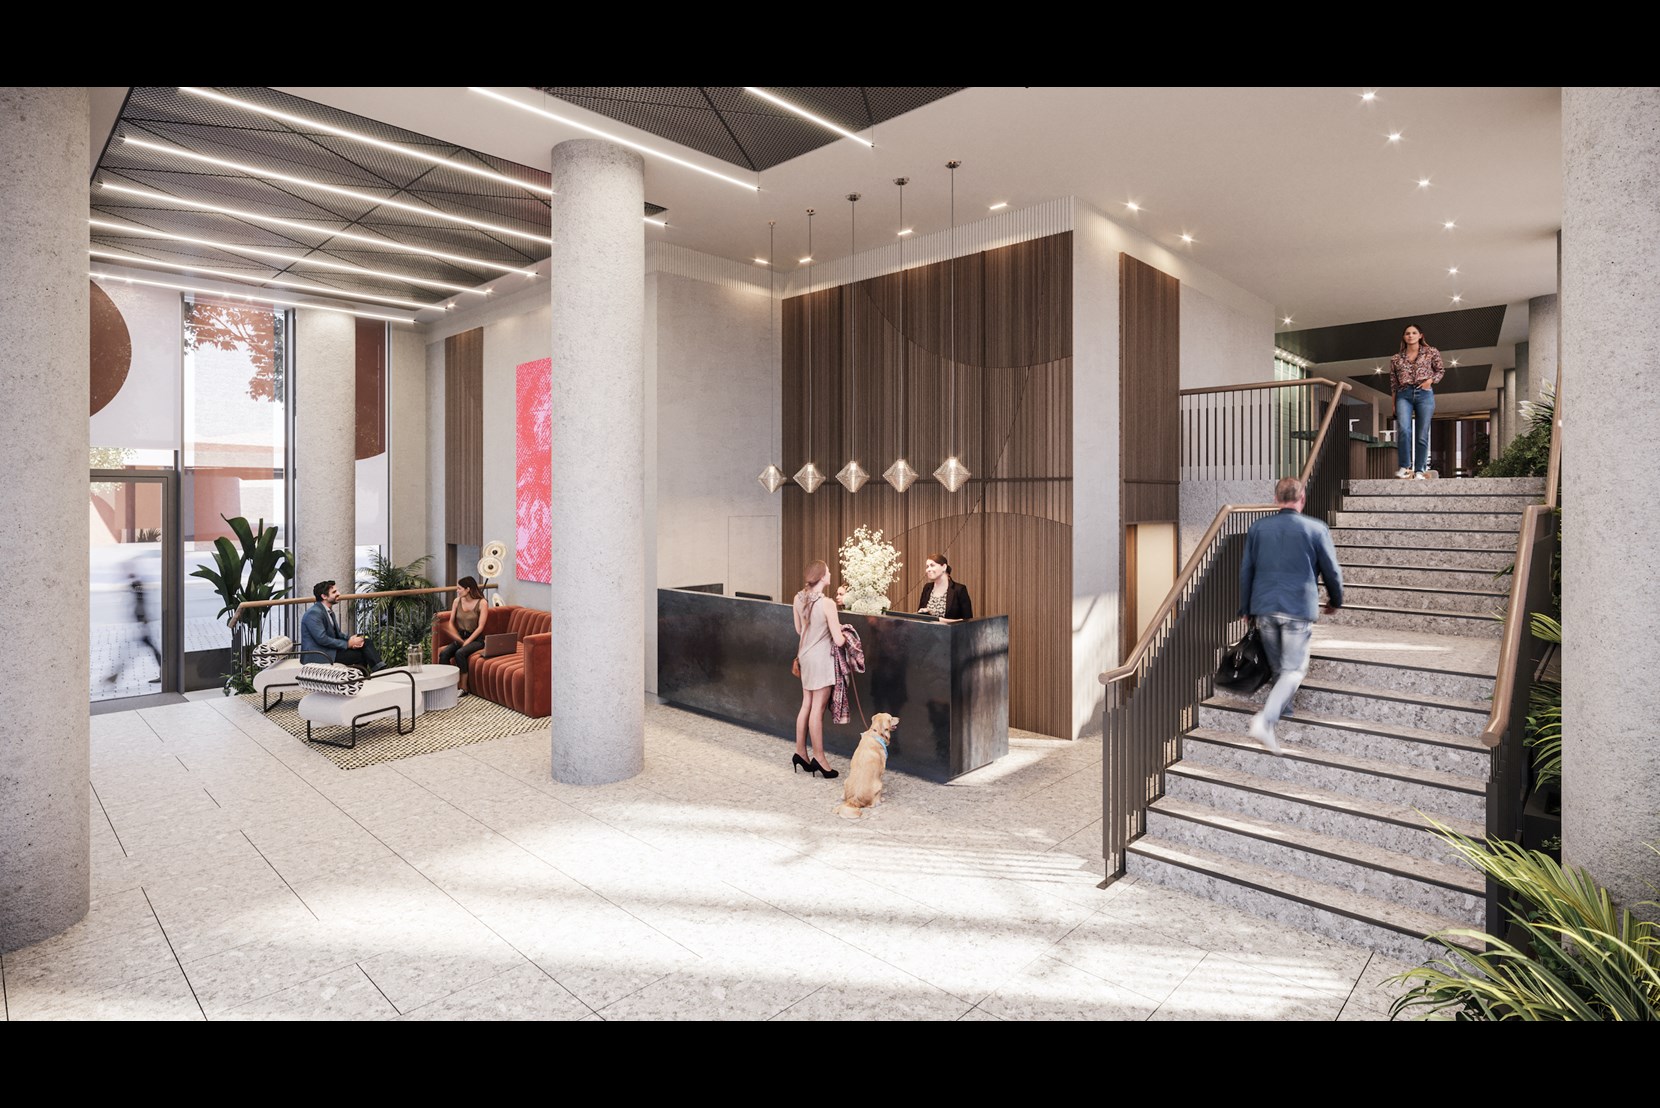 Apartments to Rent by Related Argent at Author, King's Cross, Camden, N1, concierge and lobby area